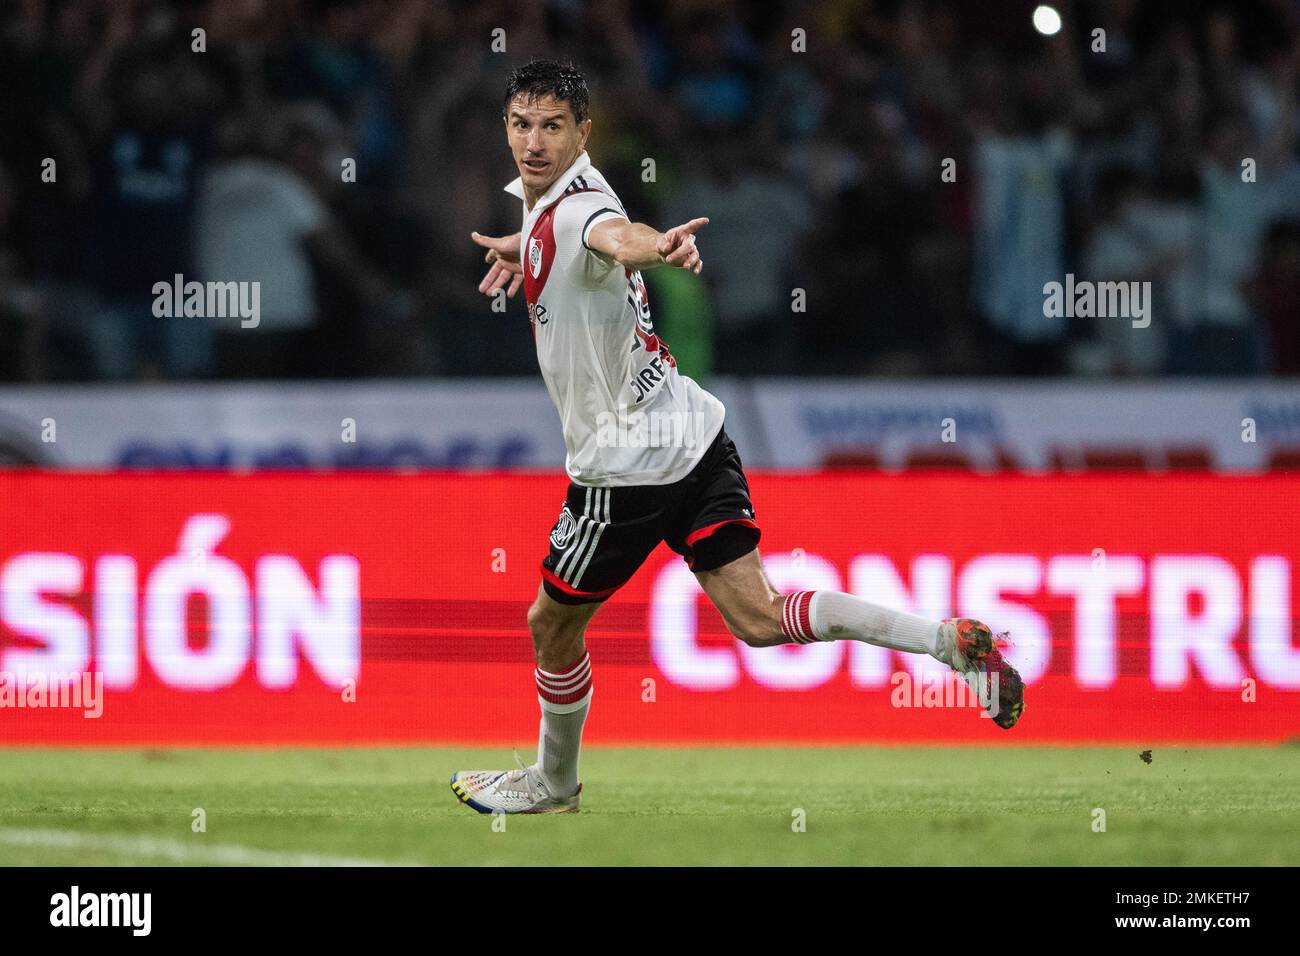 SANTIAGO DEL ESTERO, ARGENTINA, 28 January 2023:   Nacho Fernandez of River Plate celebrate after scoring opening goal during the Torneo Binance 2023 of Argentine Liga Profesional match between Central Cordoba and River Plate at Stadium Único Madre de Ciudades in Santiago del Estero, Argentina on 28 January 2023. Photo by SFSI Credit: Sebo47/Alamy Live News Stock Photo